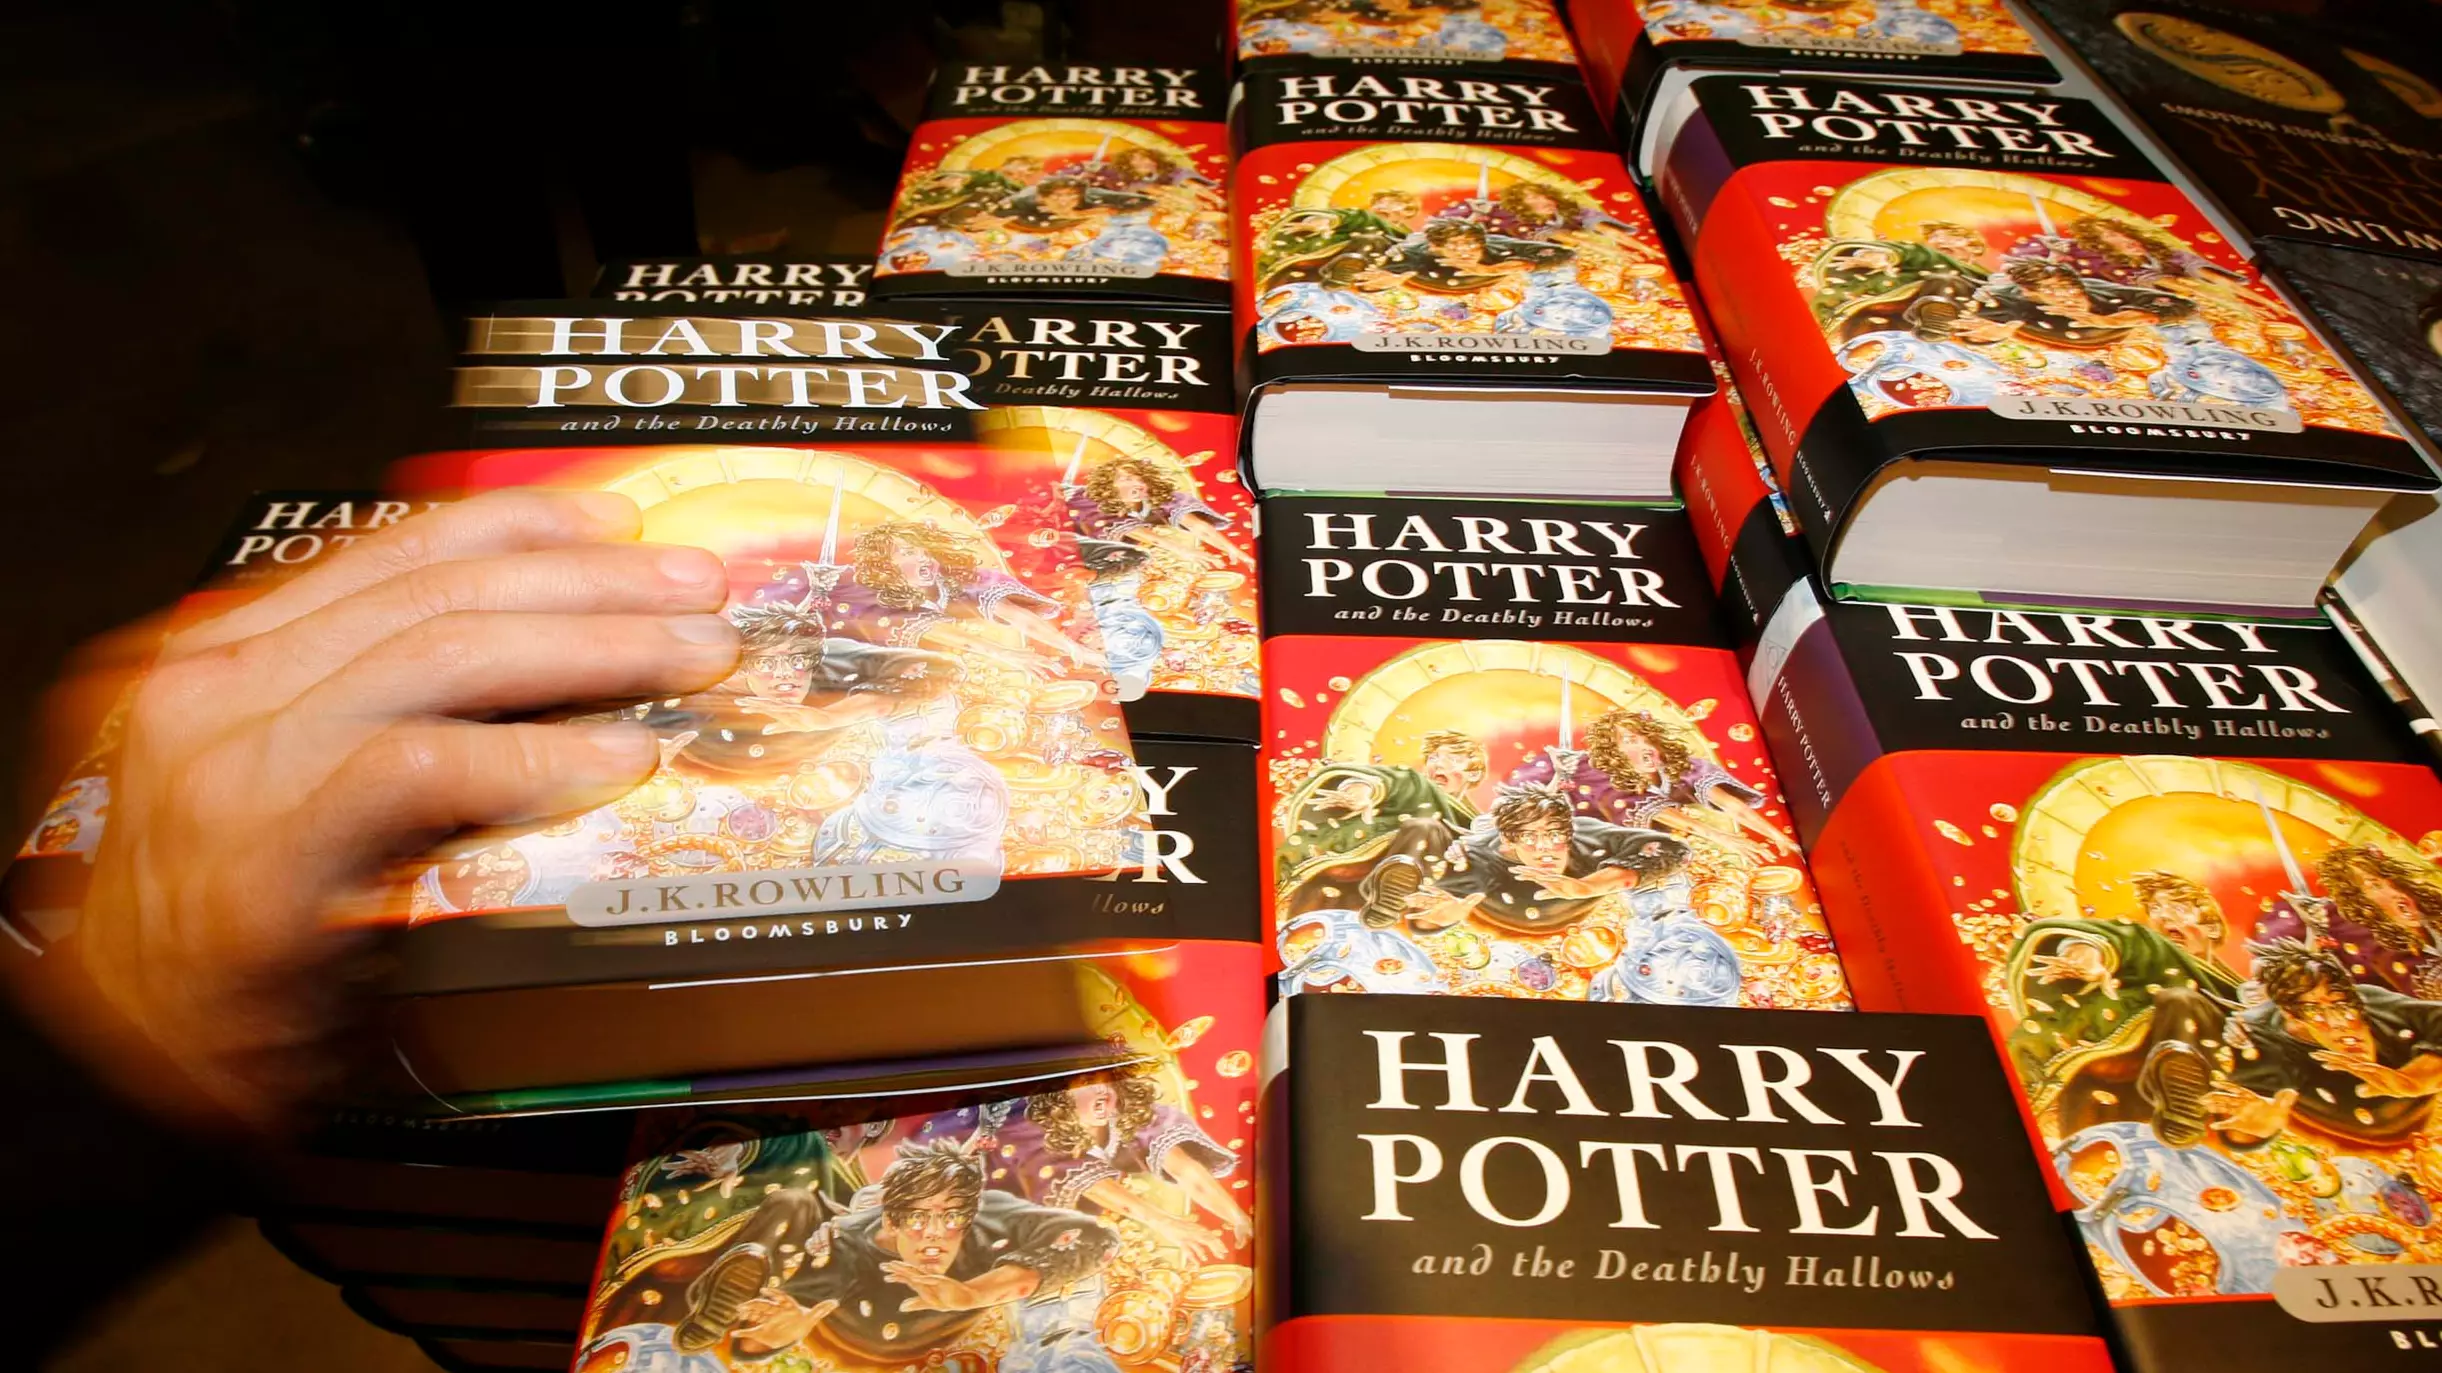 University Introduces Harry Potter Law Course To 'Encourage Creative Thinking'